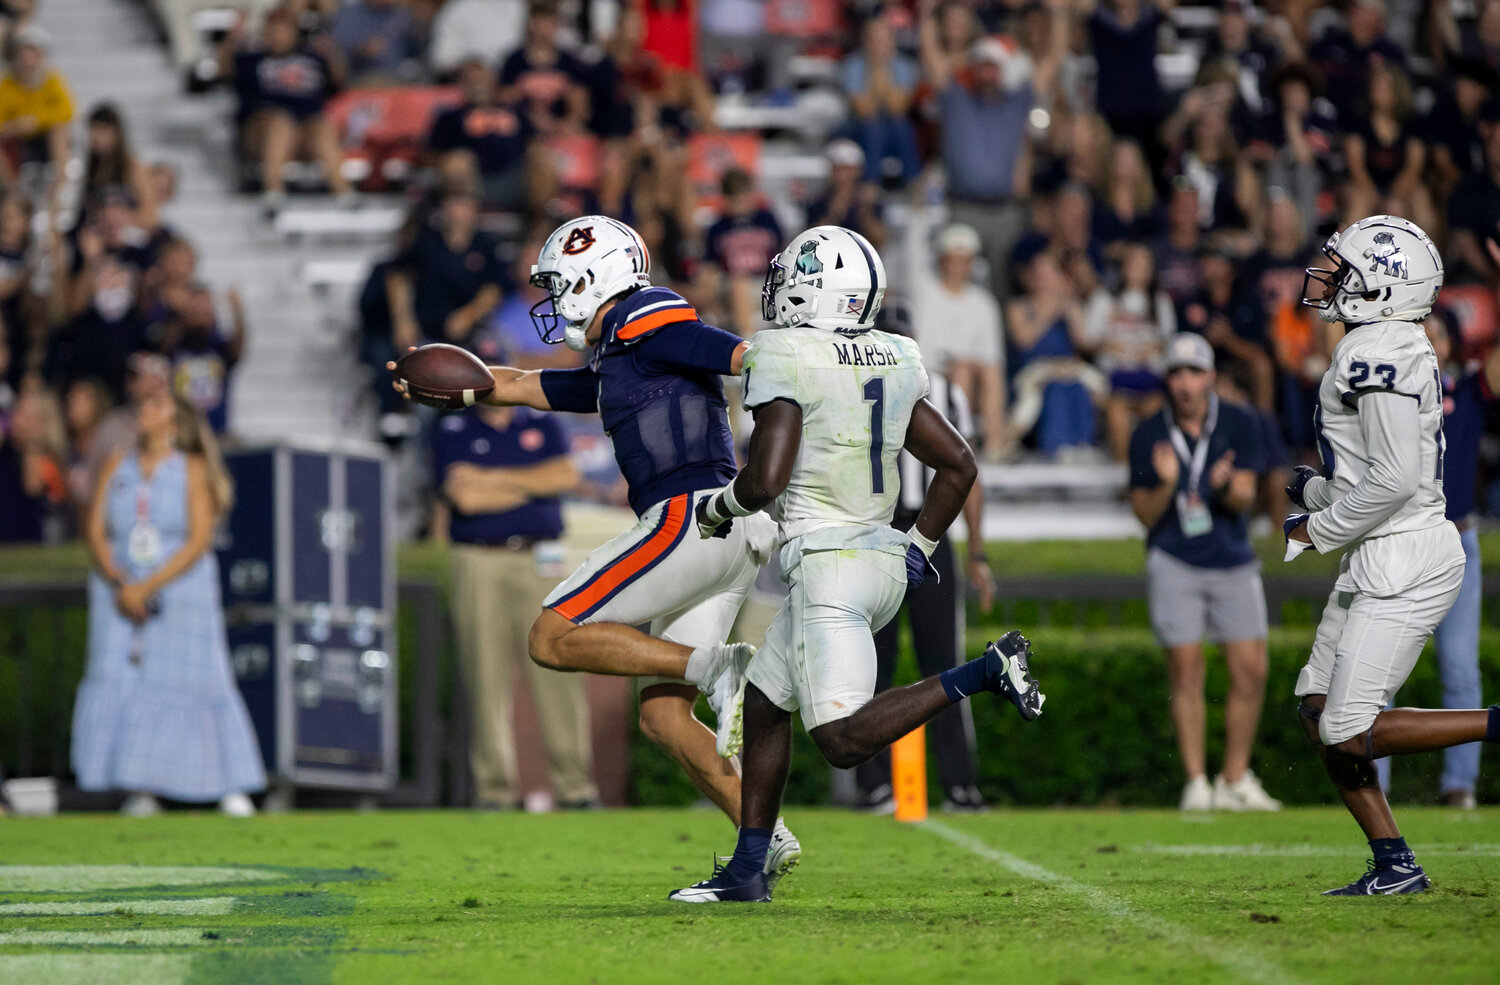 Auburn quarterback Payton Thorne extends the ball over the goal line for the second of his two rushing touchdowns on the night as part of the Tigers’ 45-13 win over the Samford Bulldogs on Saturday, Sept. 16, at Jordan-Hare Stadium. Thorne became the first Auburn quarterback since 2014 to record more than 200 passing yards and 100 rushing yards in a single game.